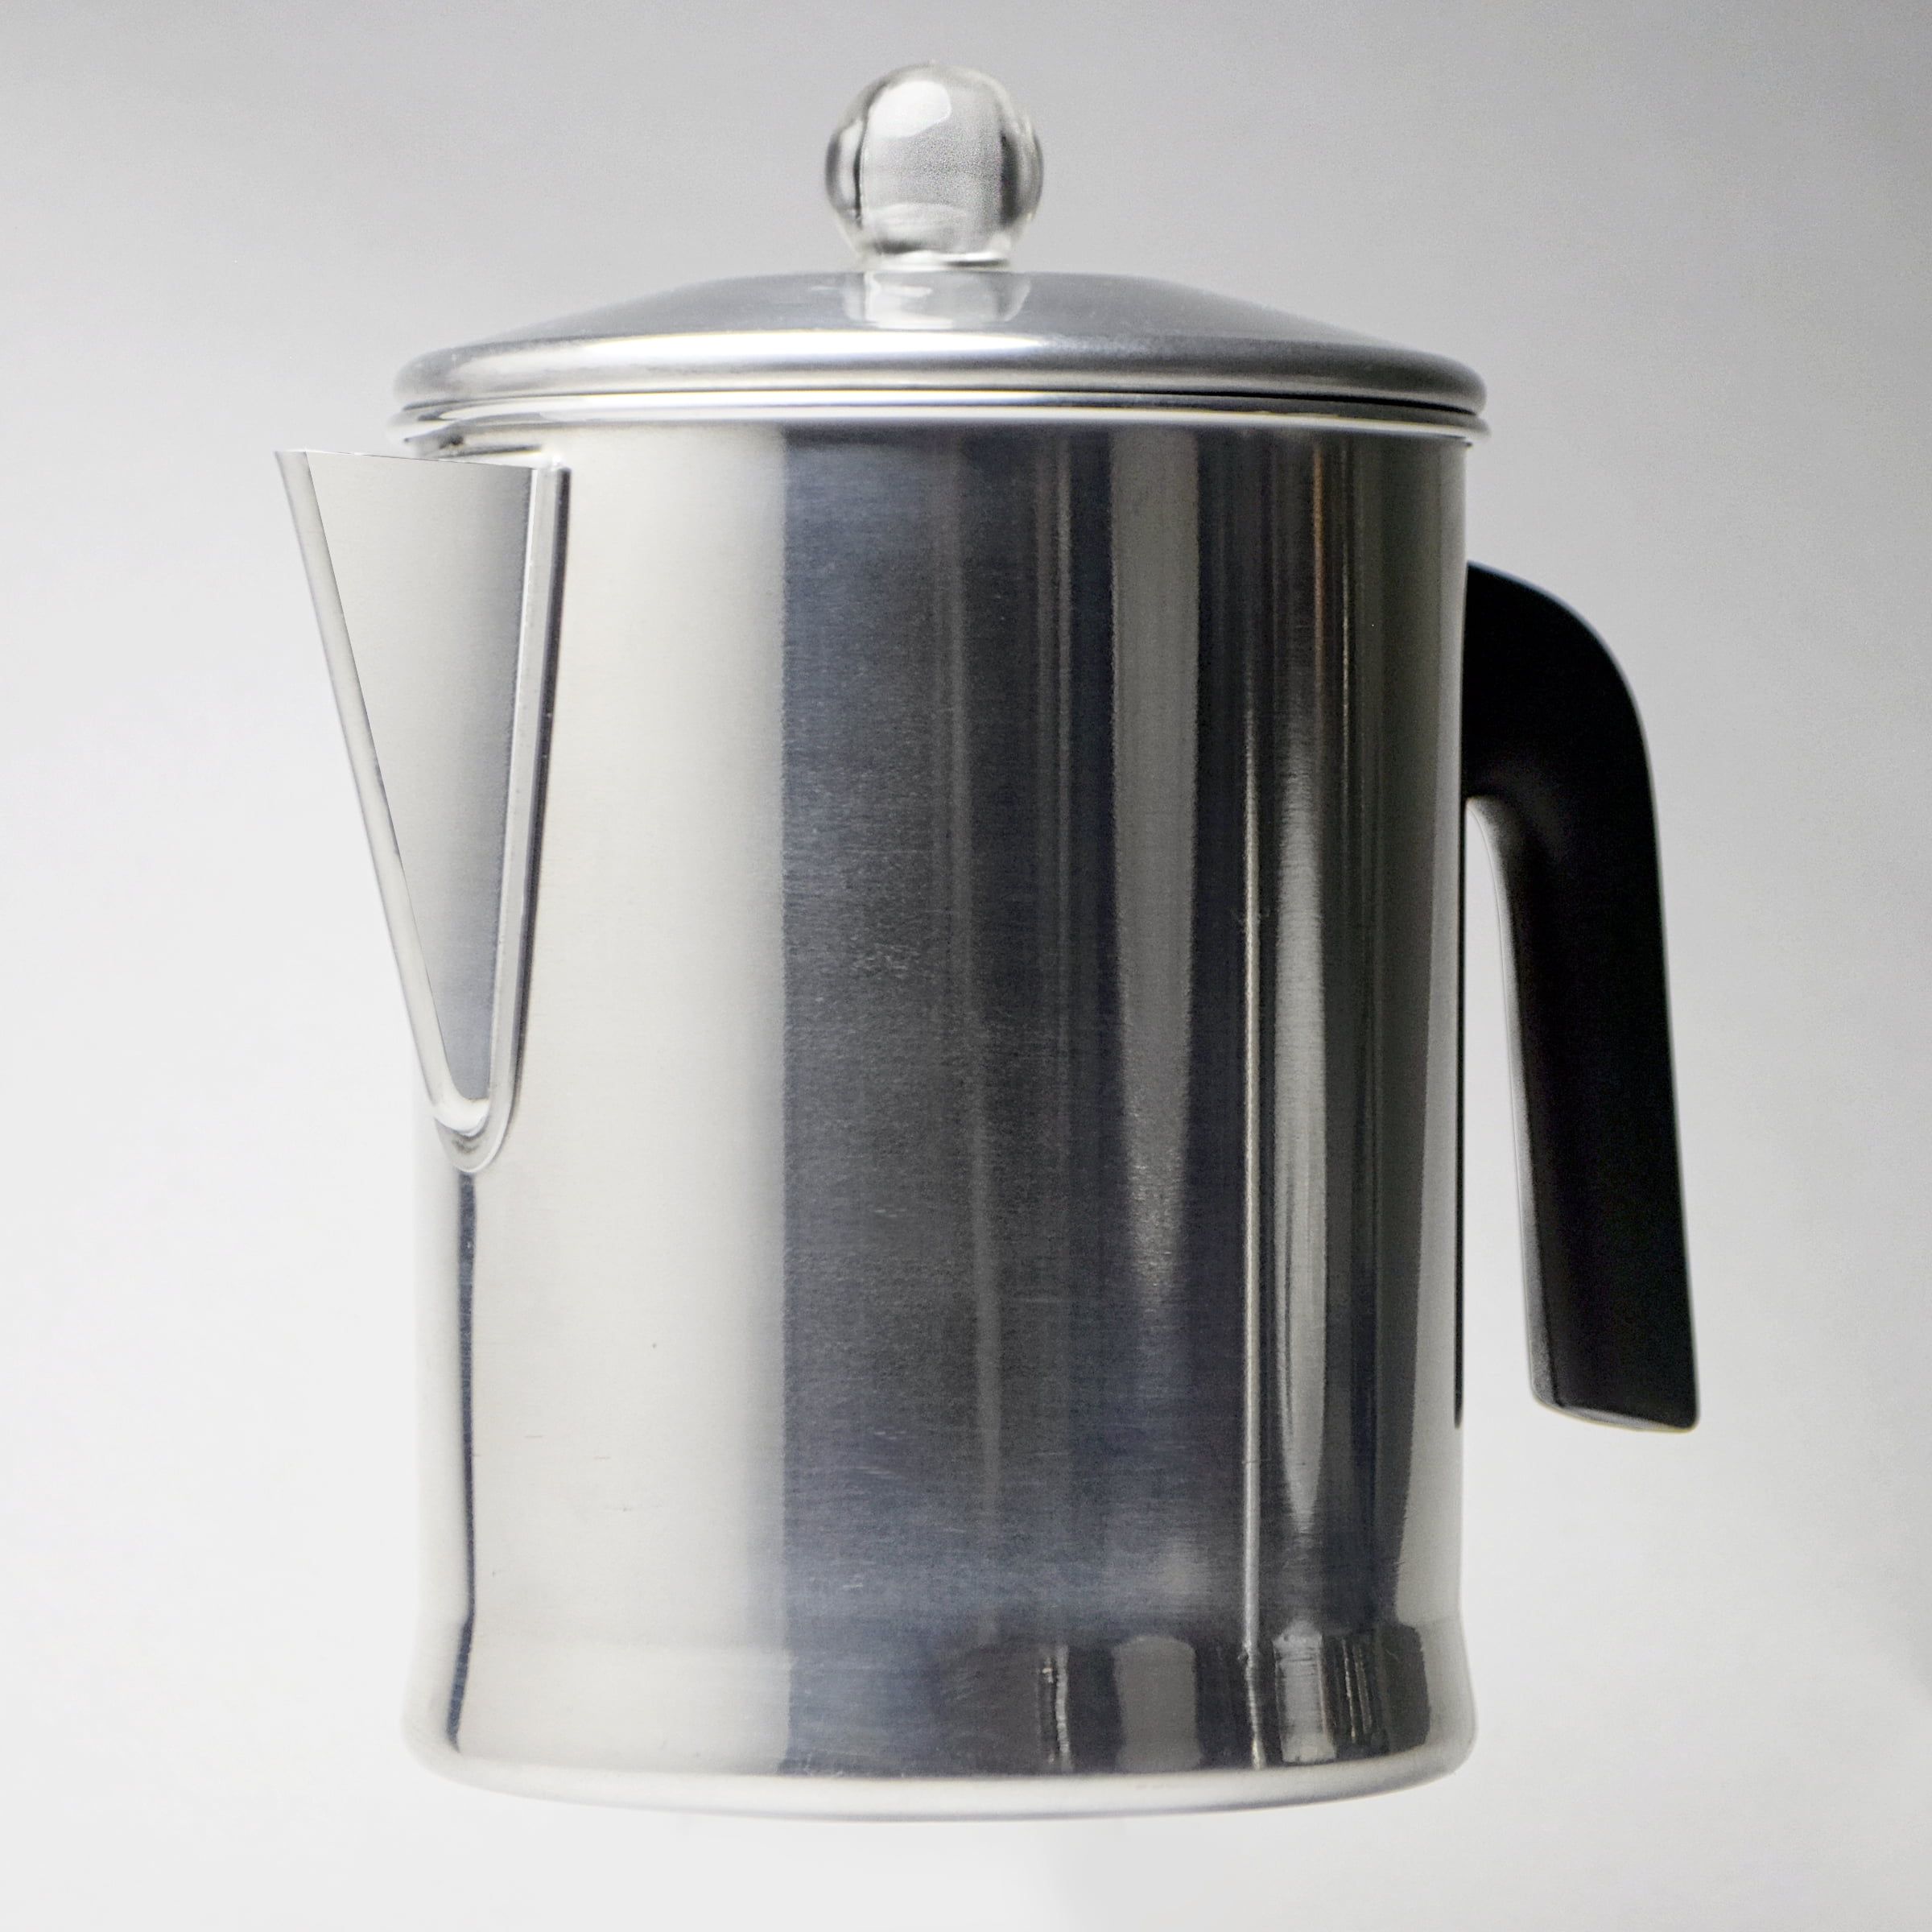 For true coffee enthusiasts who crave an authentic and aromatic brewing experience, the Primula Today Coffee Percolator is an absolute must-have. Embrace its classic charm and enjoy unparalleled brewing performance in the comfort of your own home. Indulge in the perfect cup of coffee, every single time.